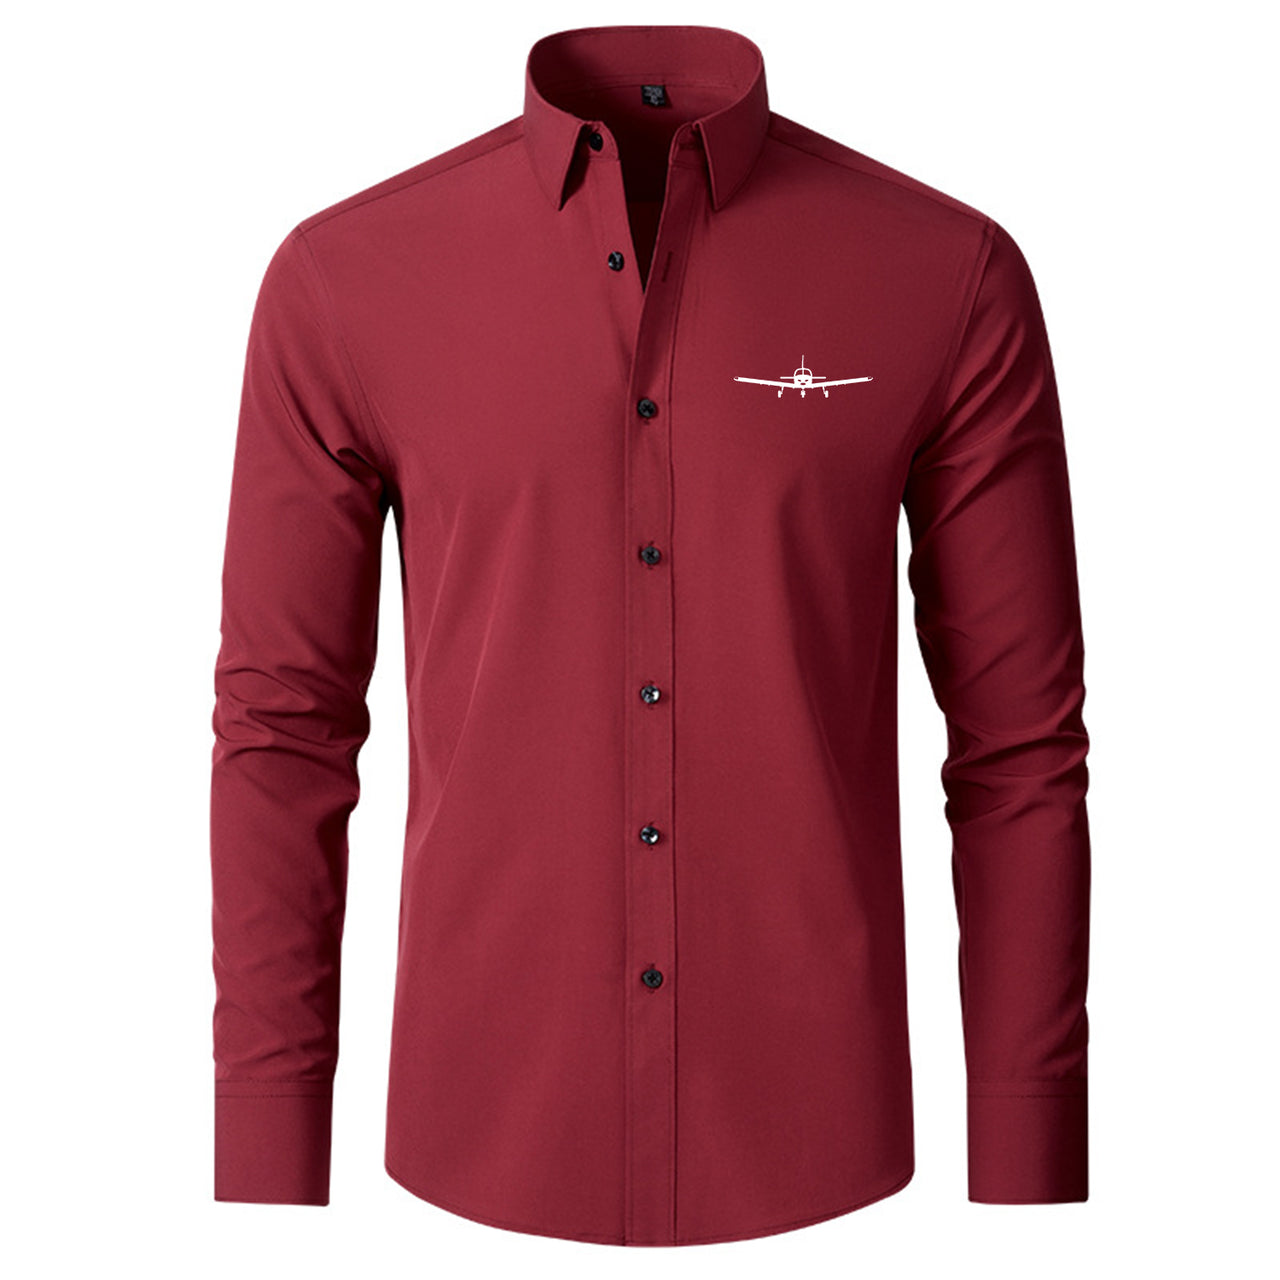 Piper PA28 Silhouette Plane Designed Long Sleeve Shirts